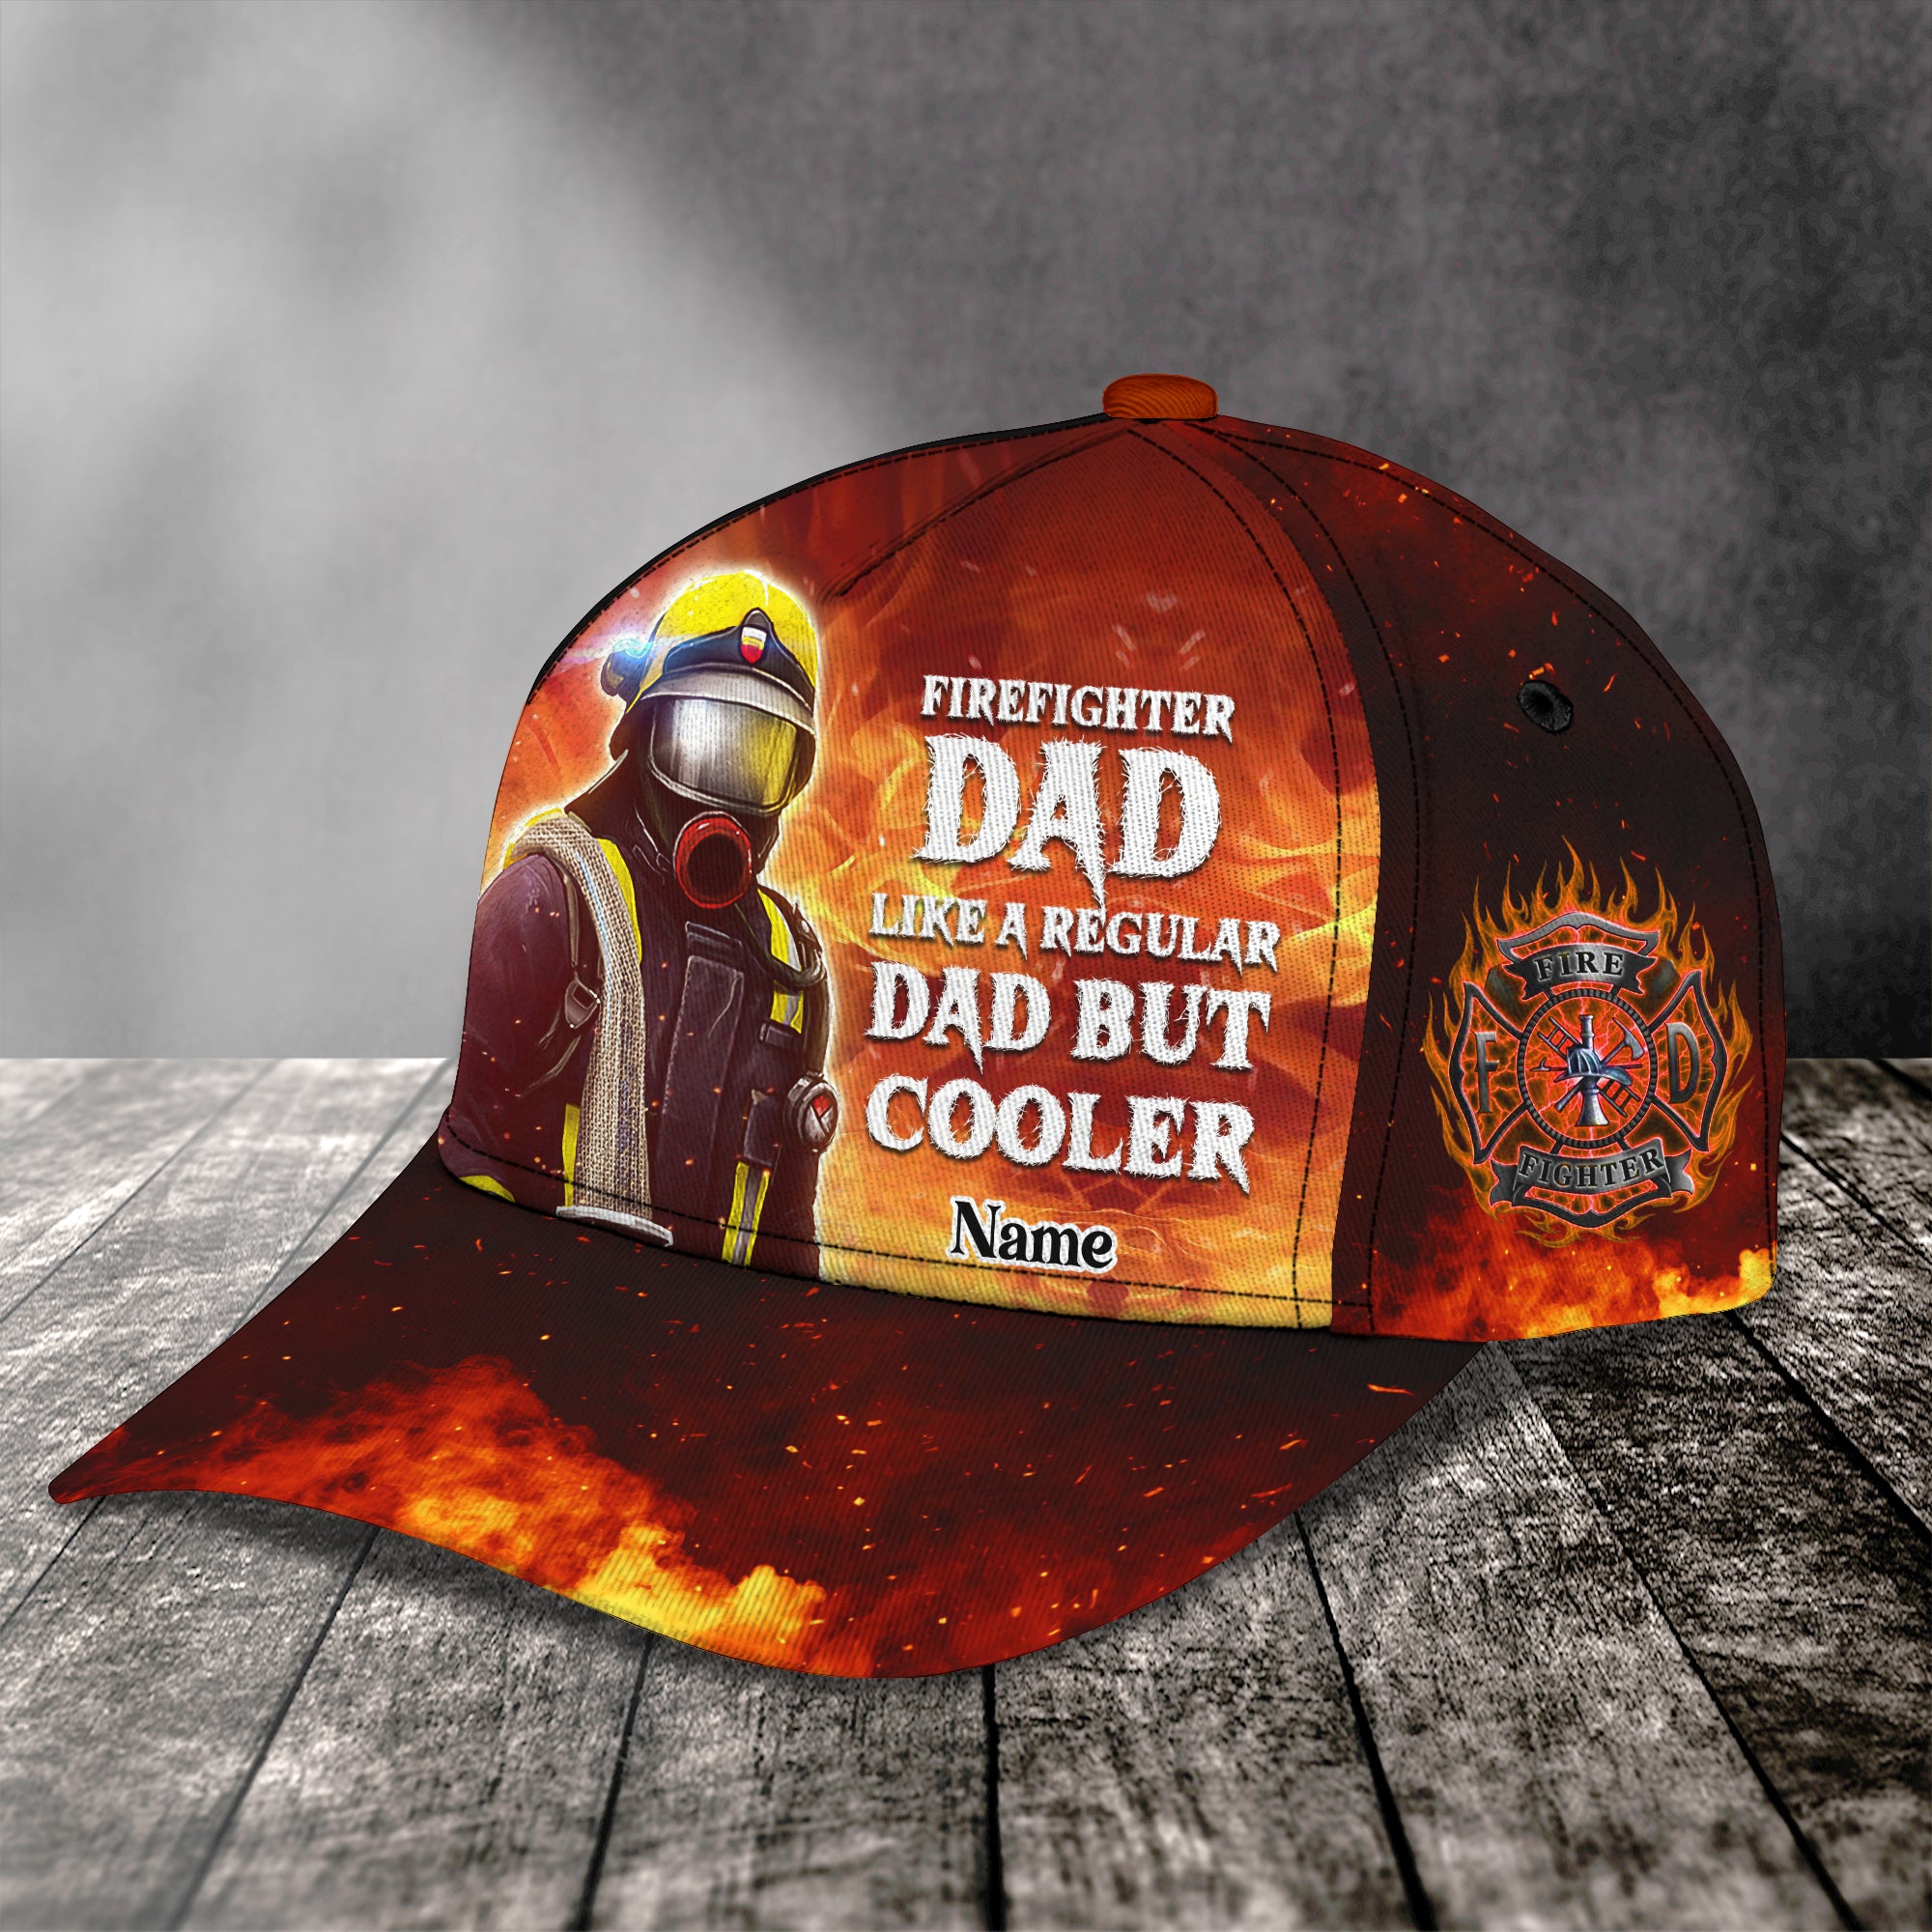 Firefighter America Mtt - Personalized Name Cap - Nt168 - Ct069